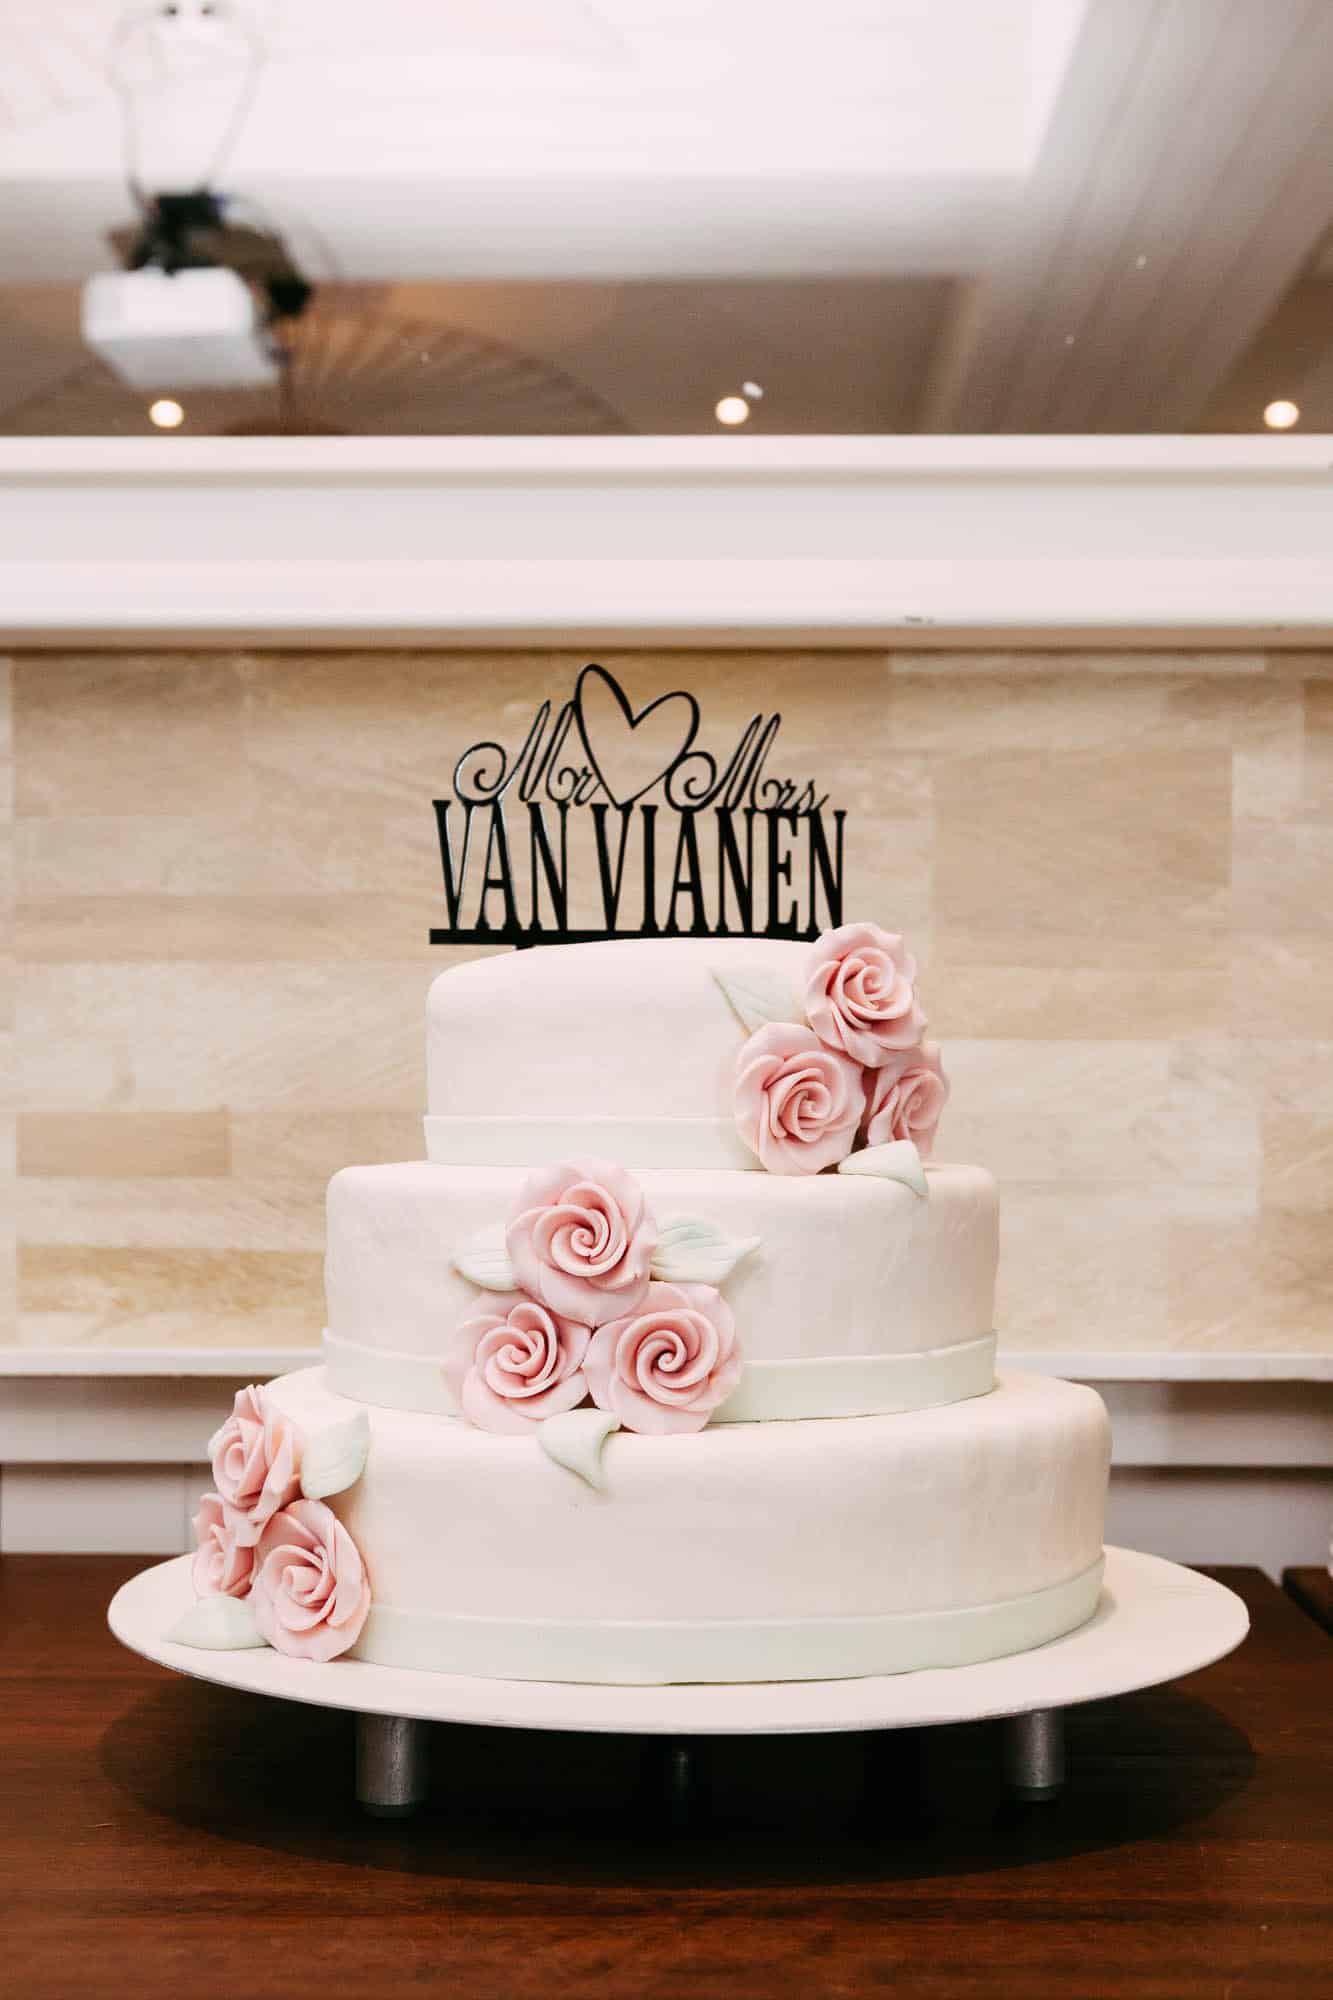 A wedding cake decorated with roses and a cake topper.